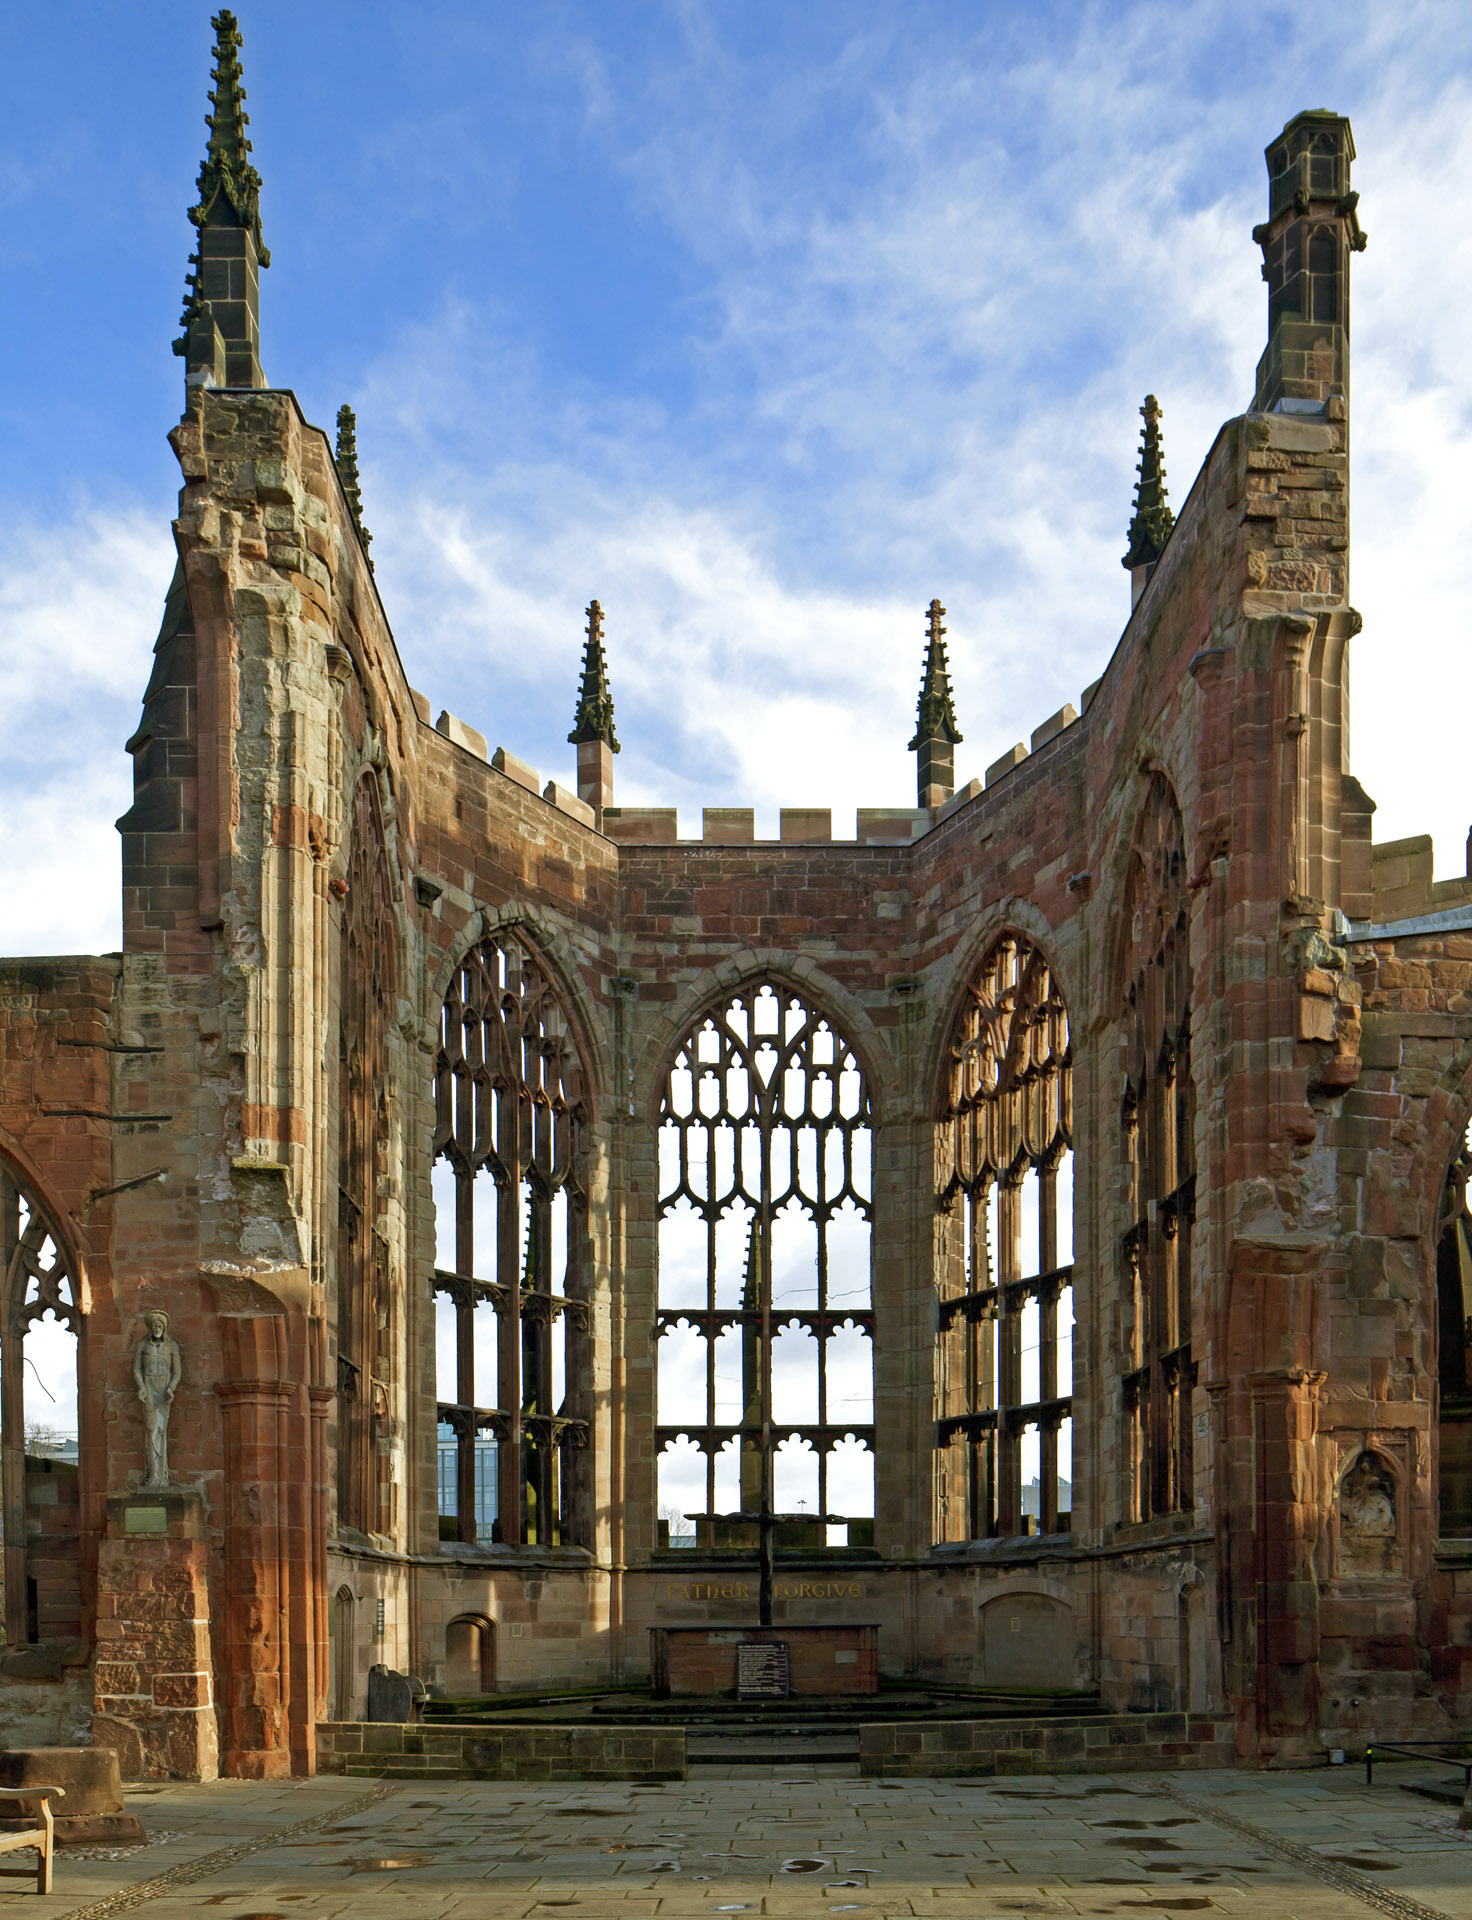 Ruins of the Former Cathedral Church of St. Michael, Coventry (United Kingdom, 2012 Watch): Funding from American Express has contributed to the conservation of this twelfth-century ruin.